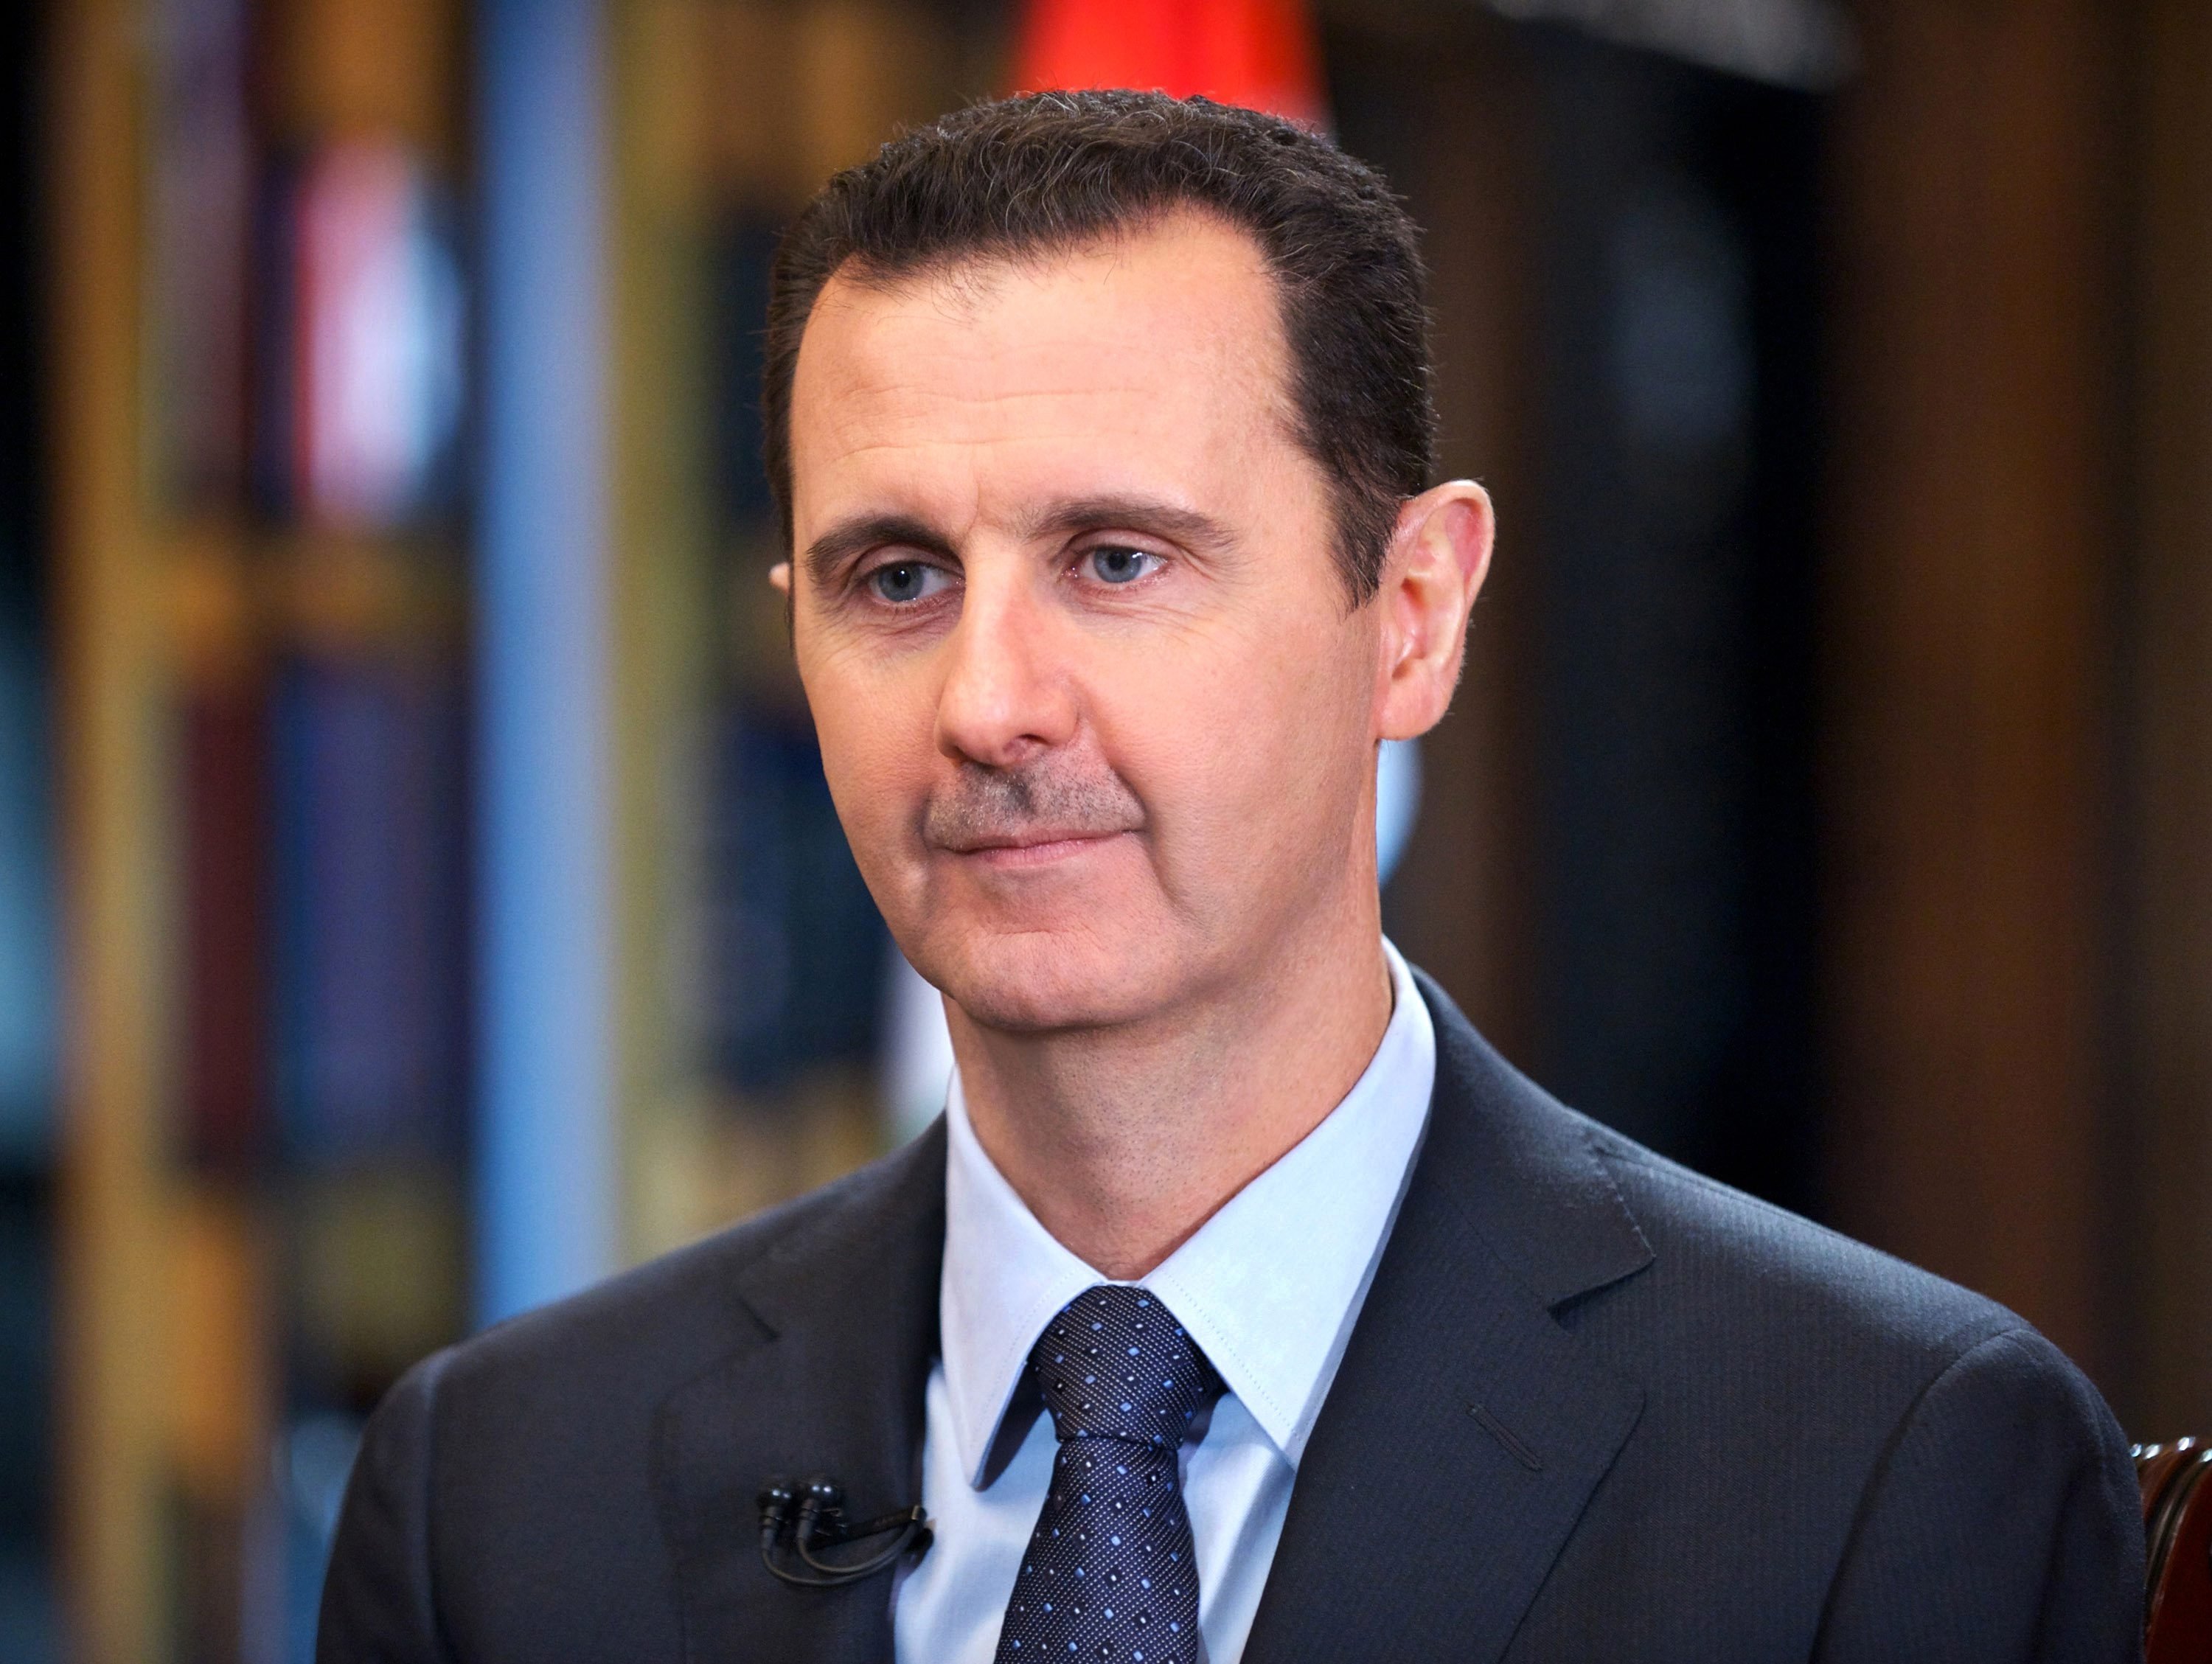 UAE top official in Syria to meet Assad during first visit since 2011 | Daily Sabah